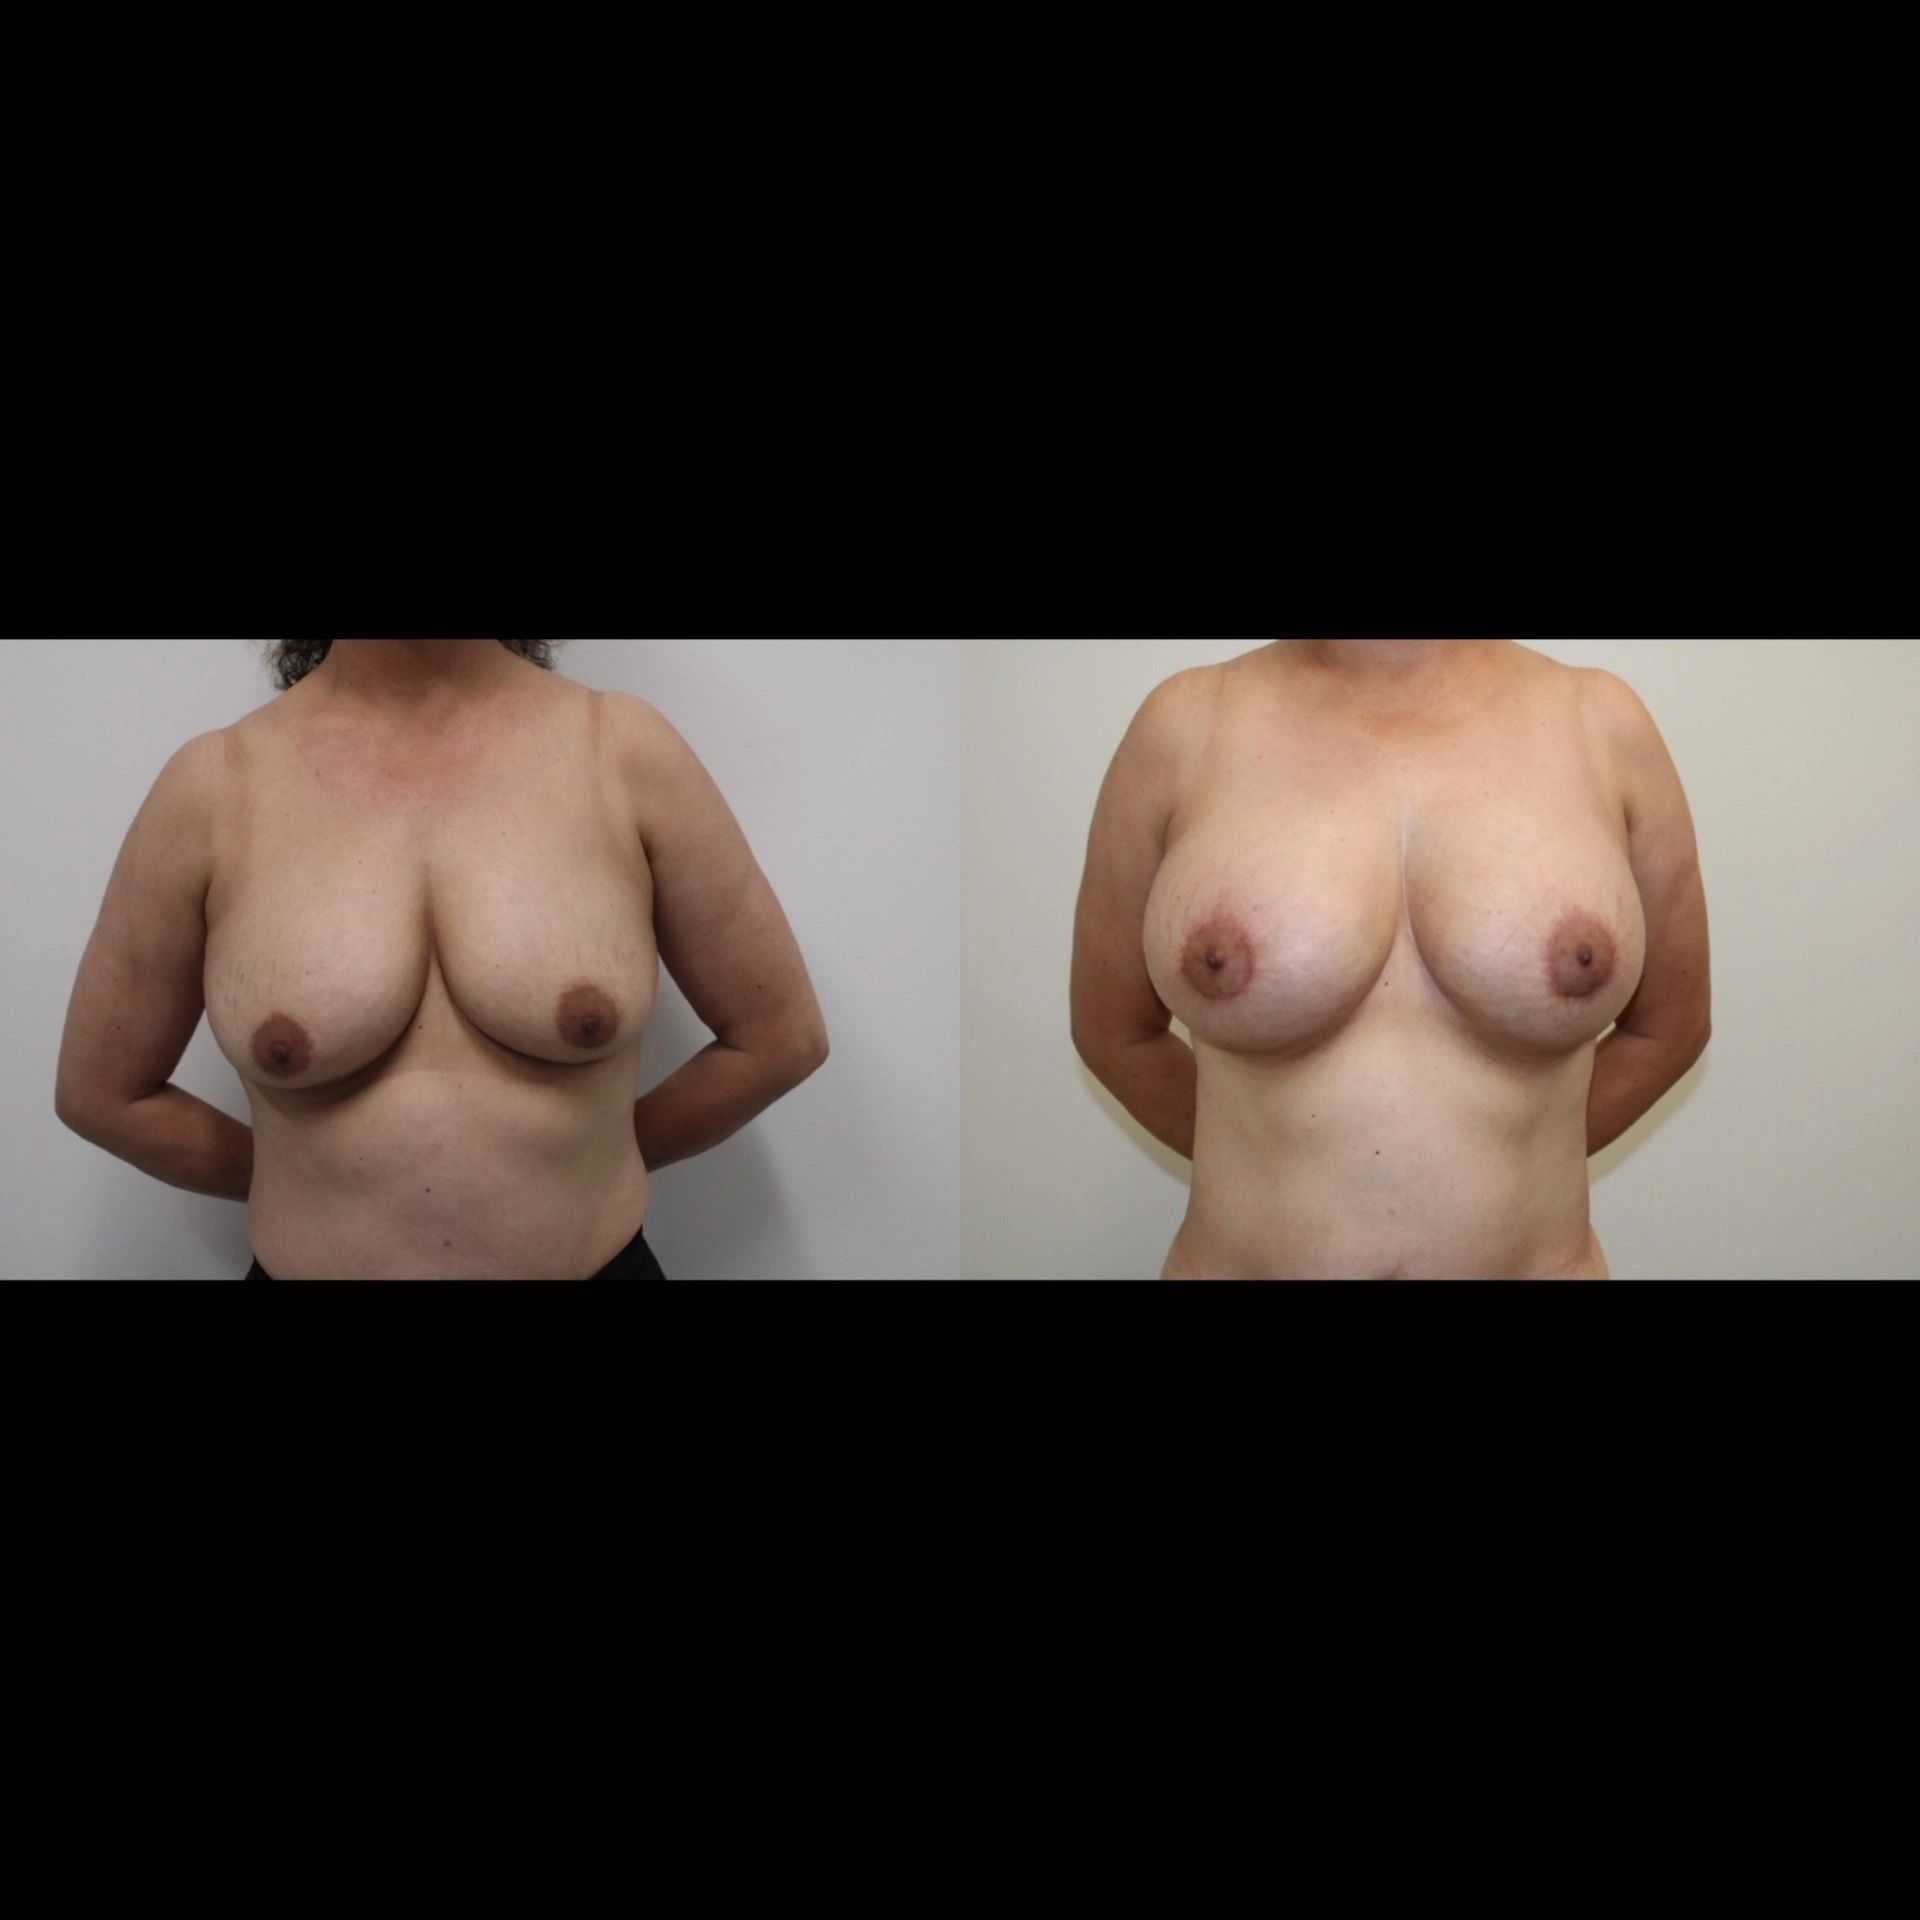 Before image natural breast and position After image: enhanced breast shape and elevated position